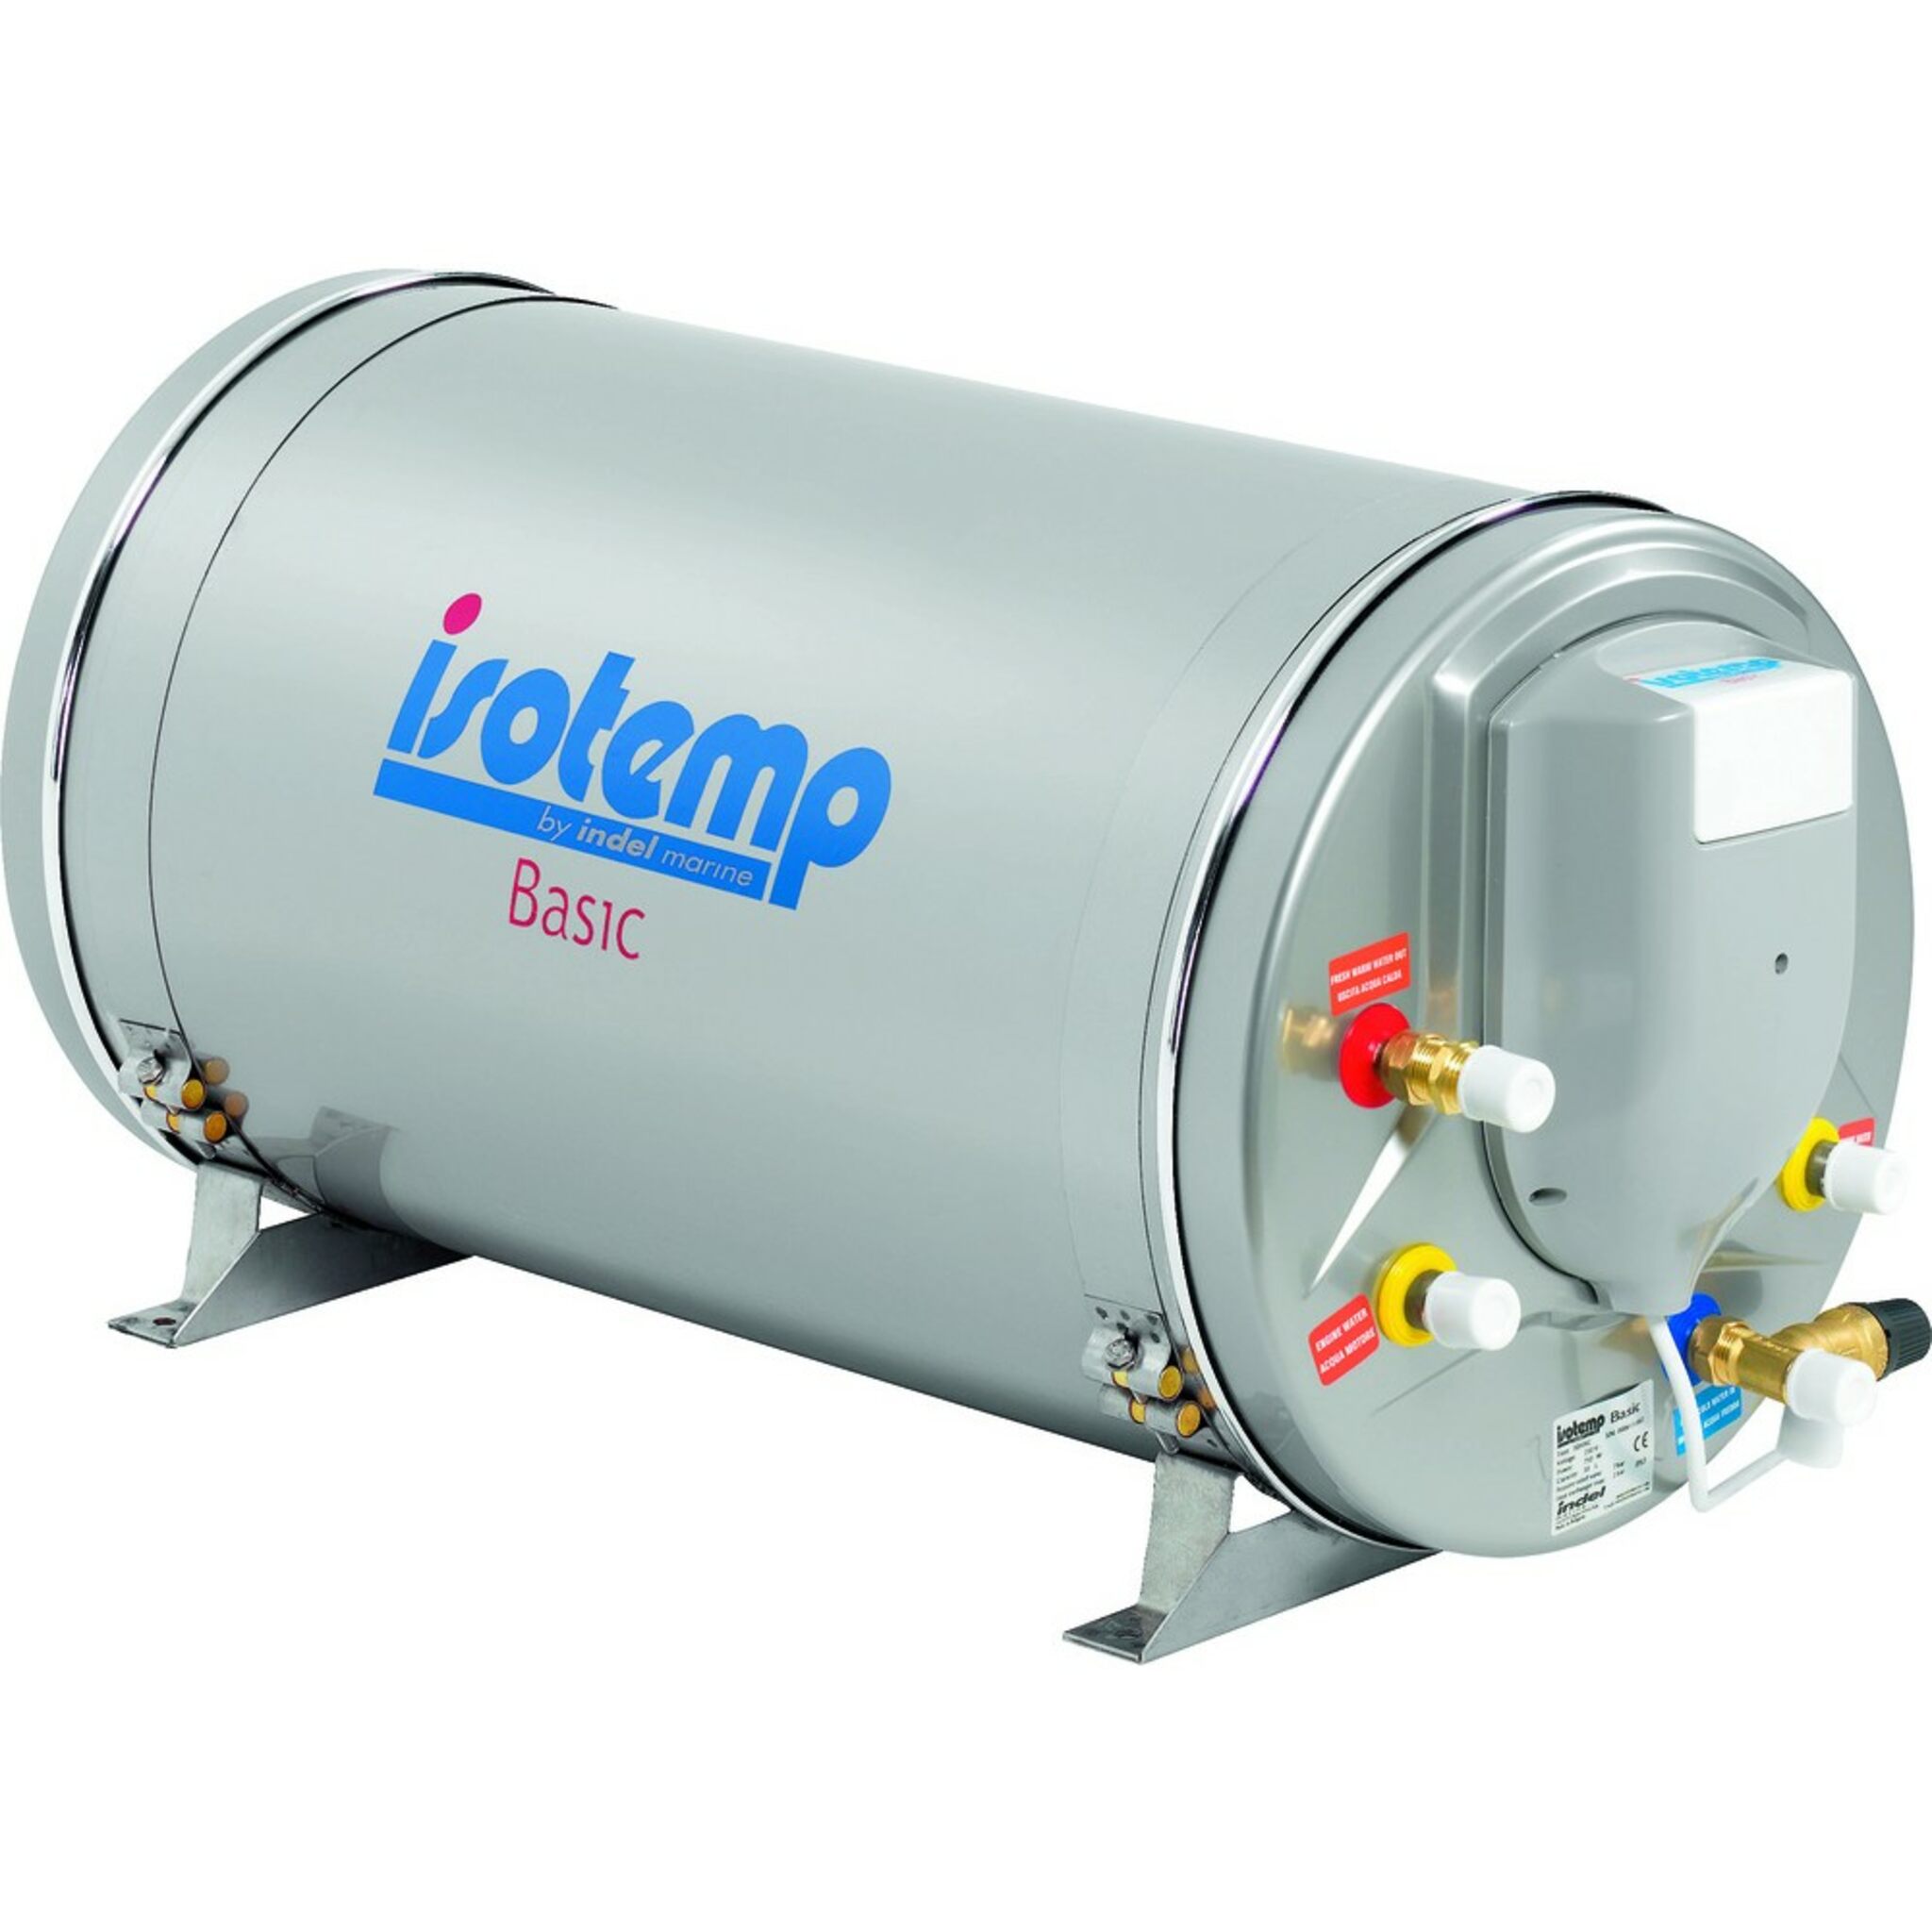 Isotherm water heater Isotemp Basic